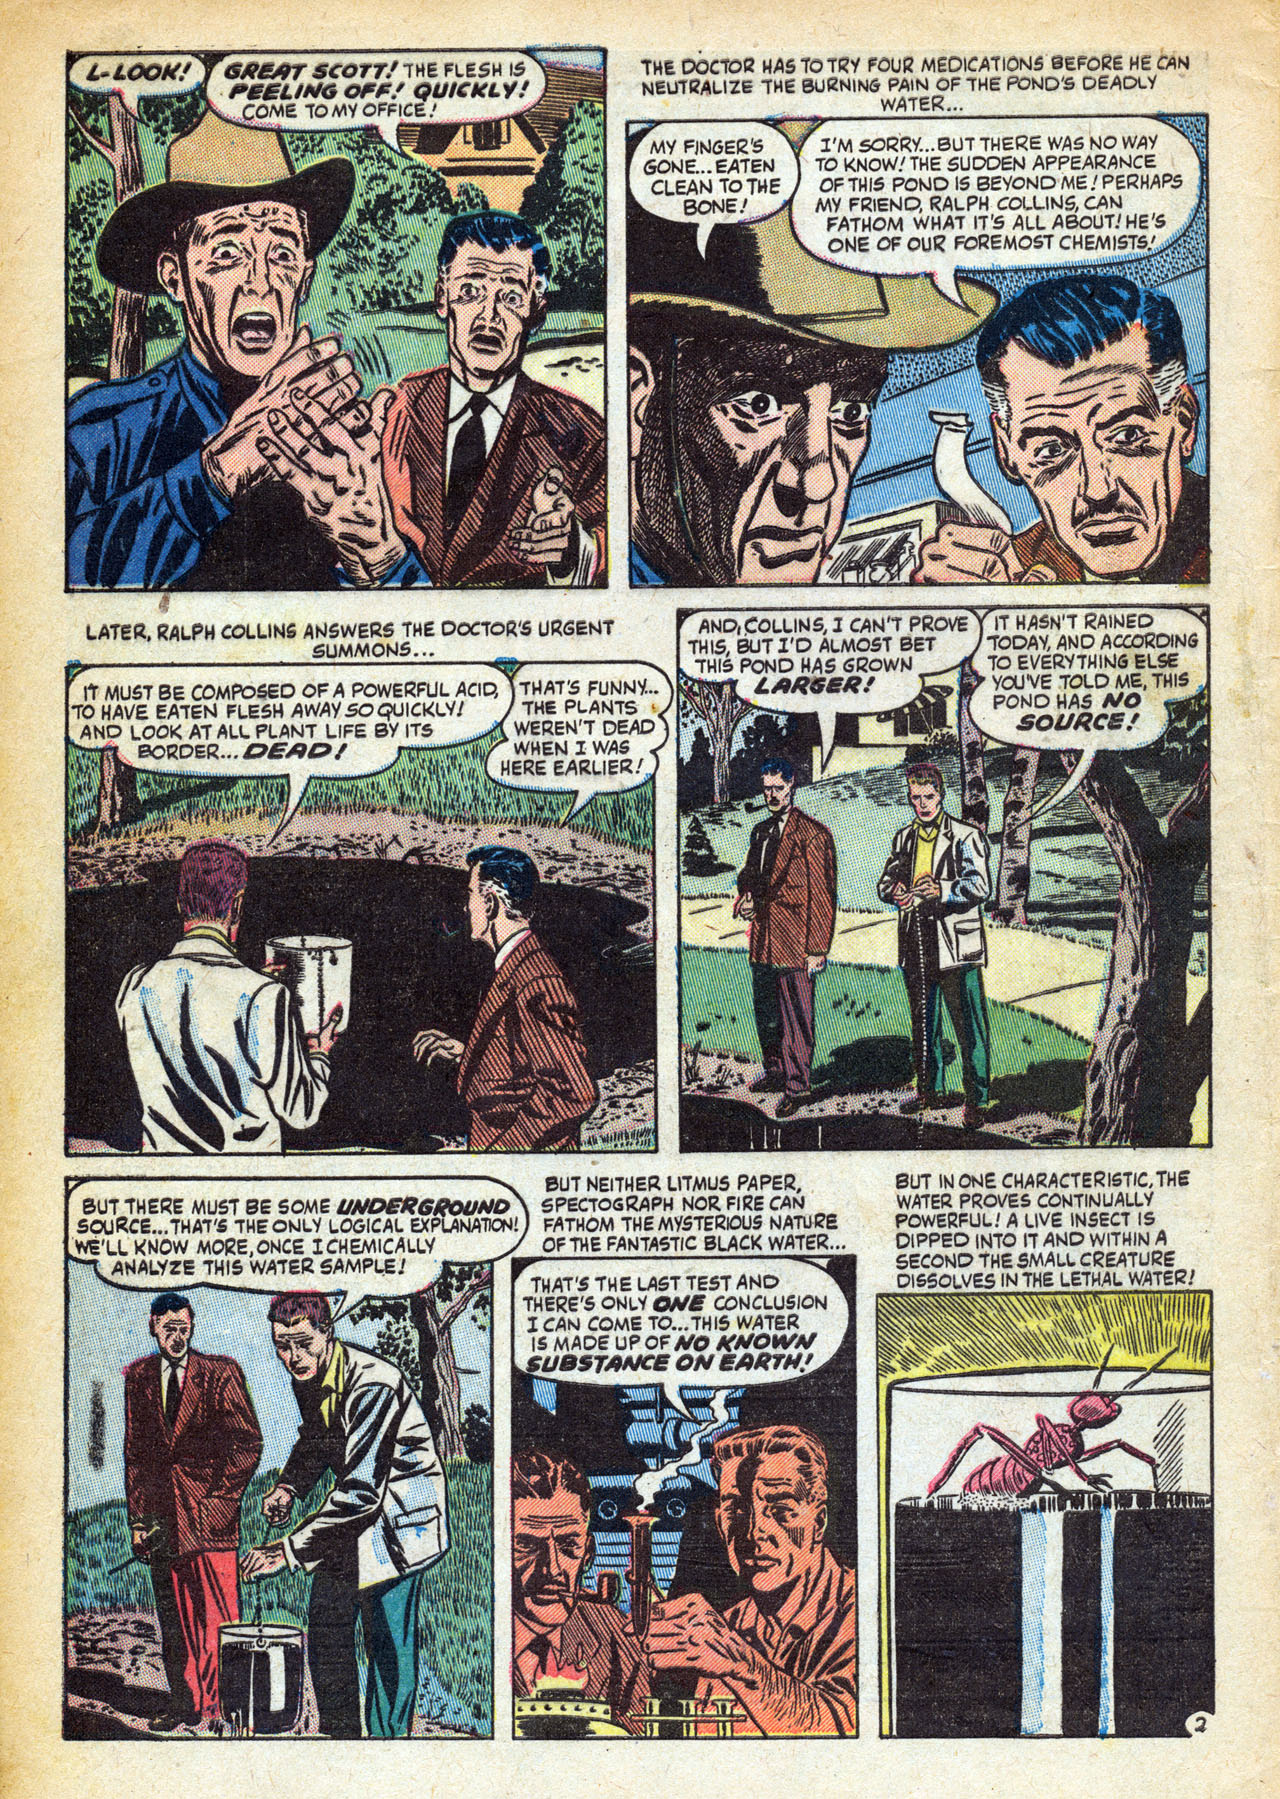 Marvel Tales (1949) 126 Page 3